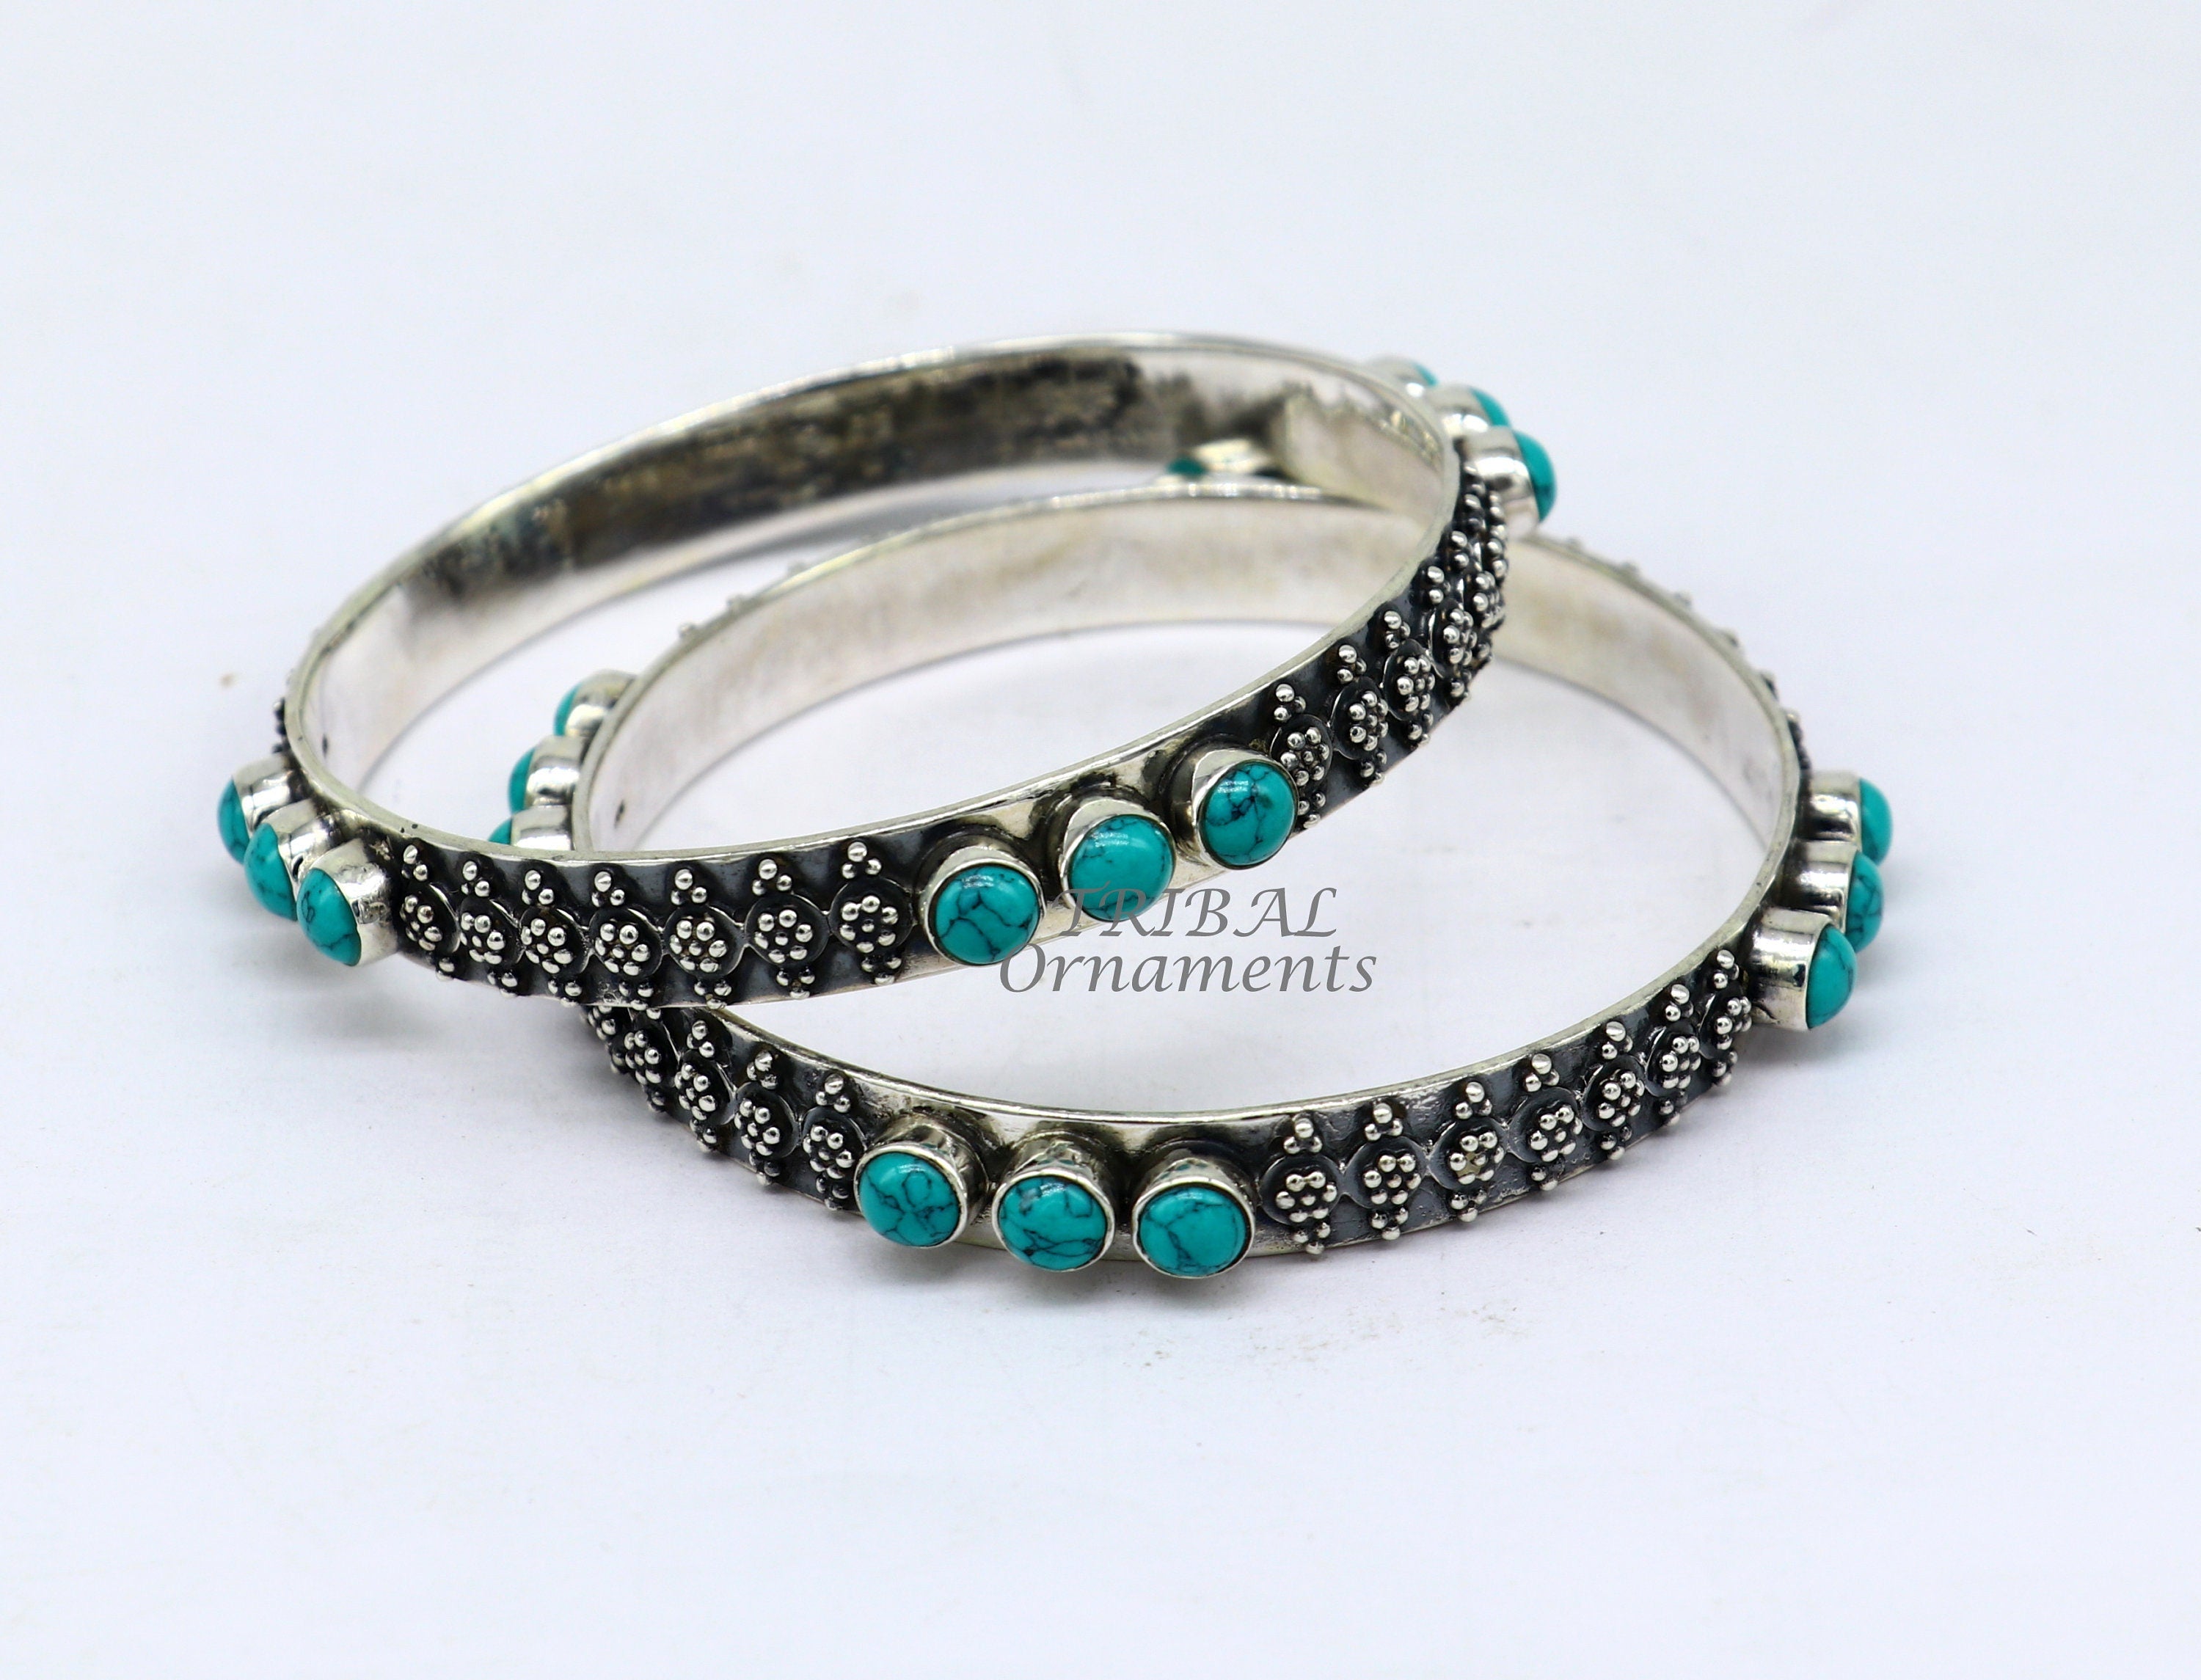 ONE OF THE BEST EARLY 1900'S VINTAGE ZUNI TURQUOISE STERLING SILVER BRACELET  | eBay